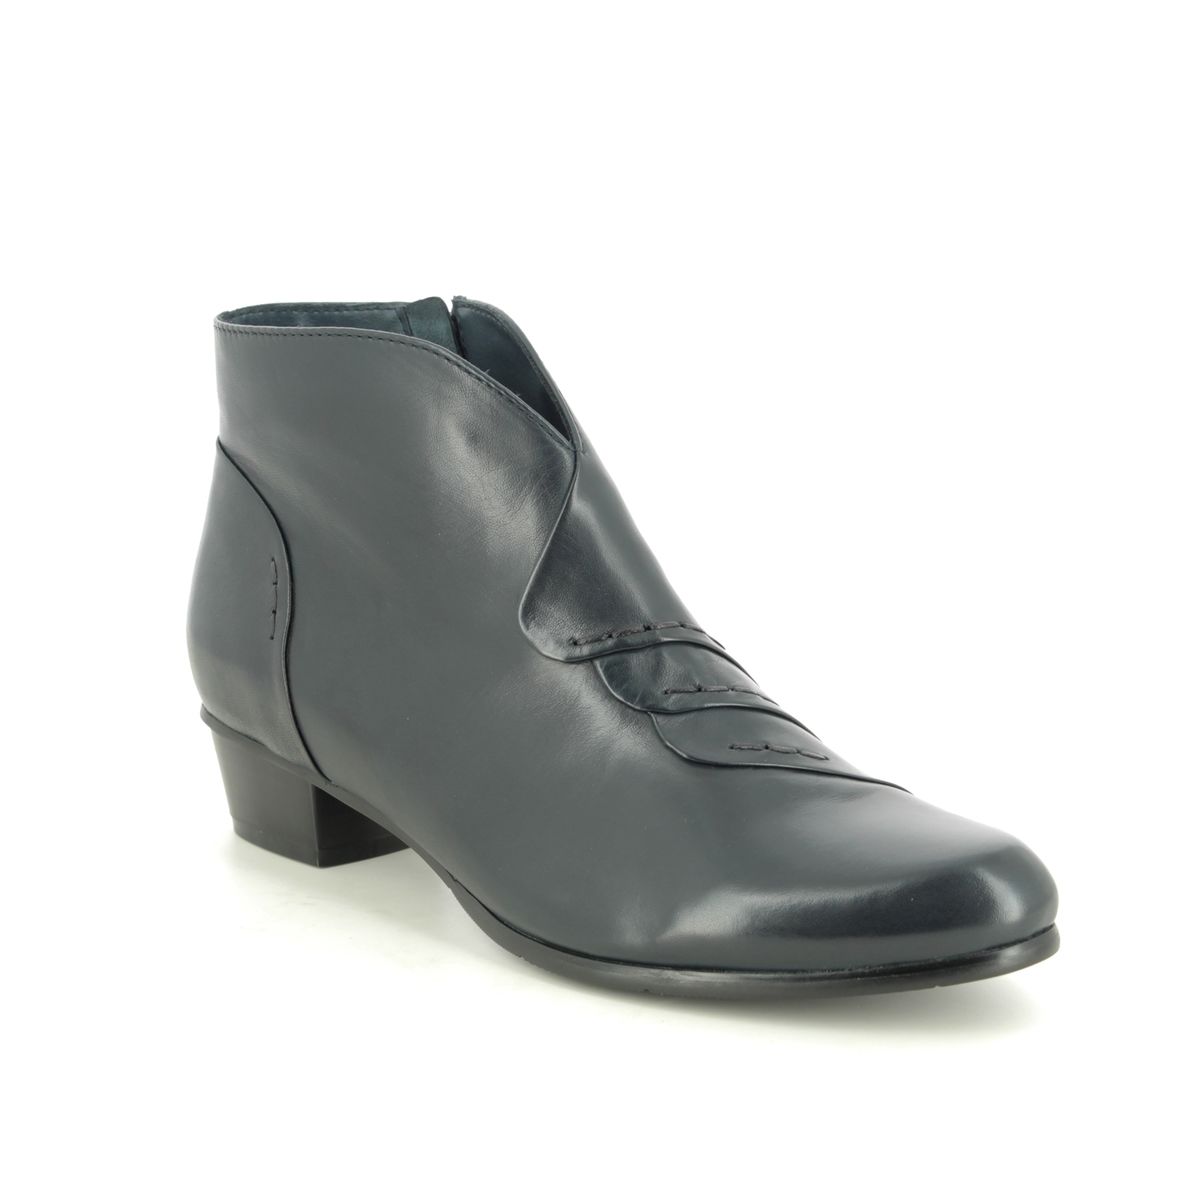 Regarde le Ciel Stefany 335 Navy Leather Womens Ankle Boots 0335-150 in a Plain Leather in Size 41